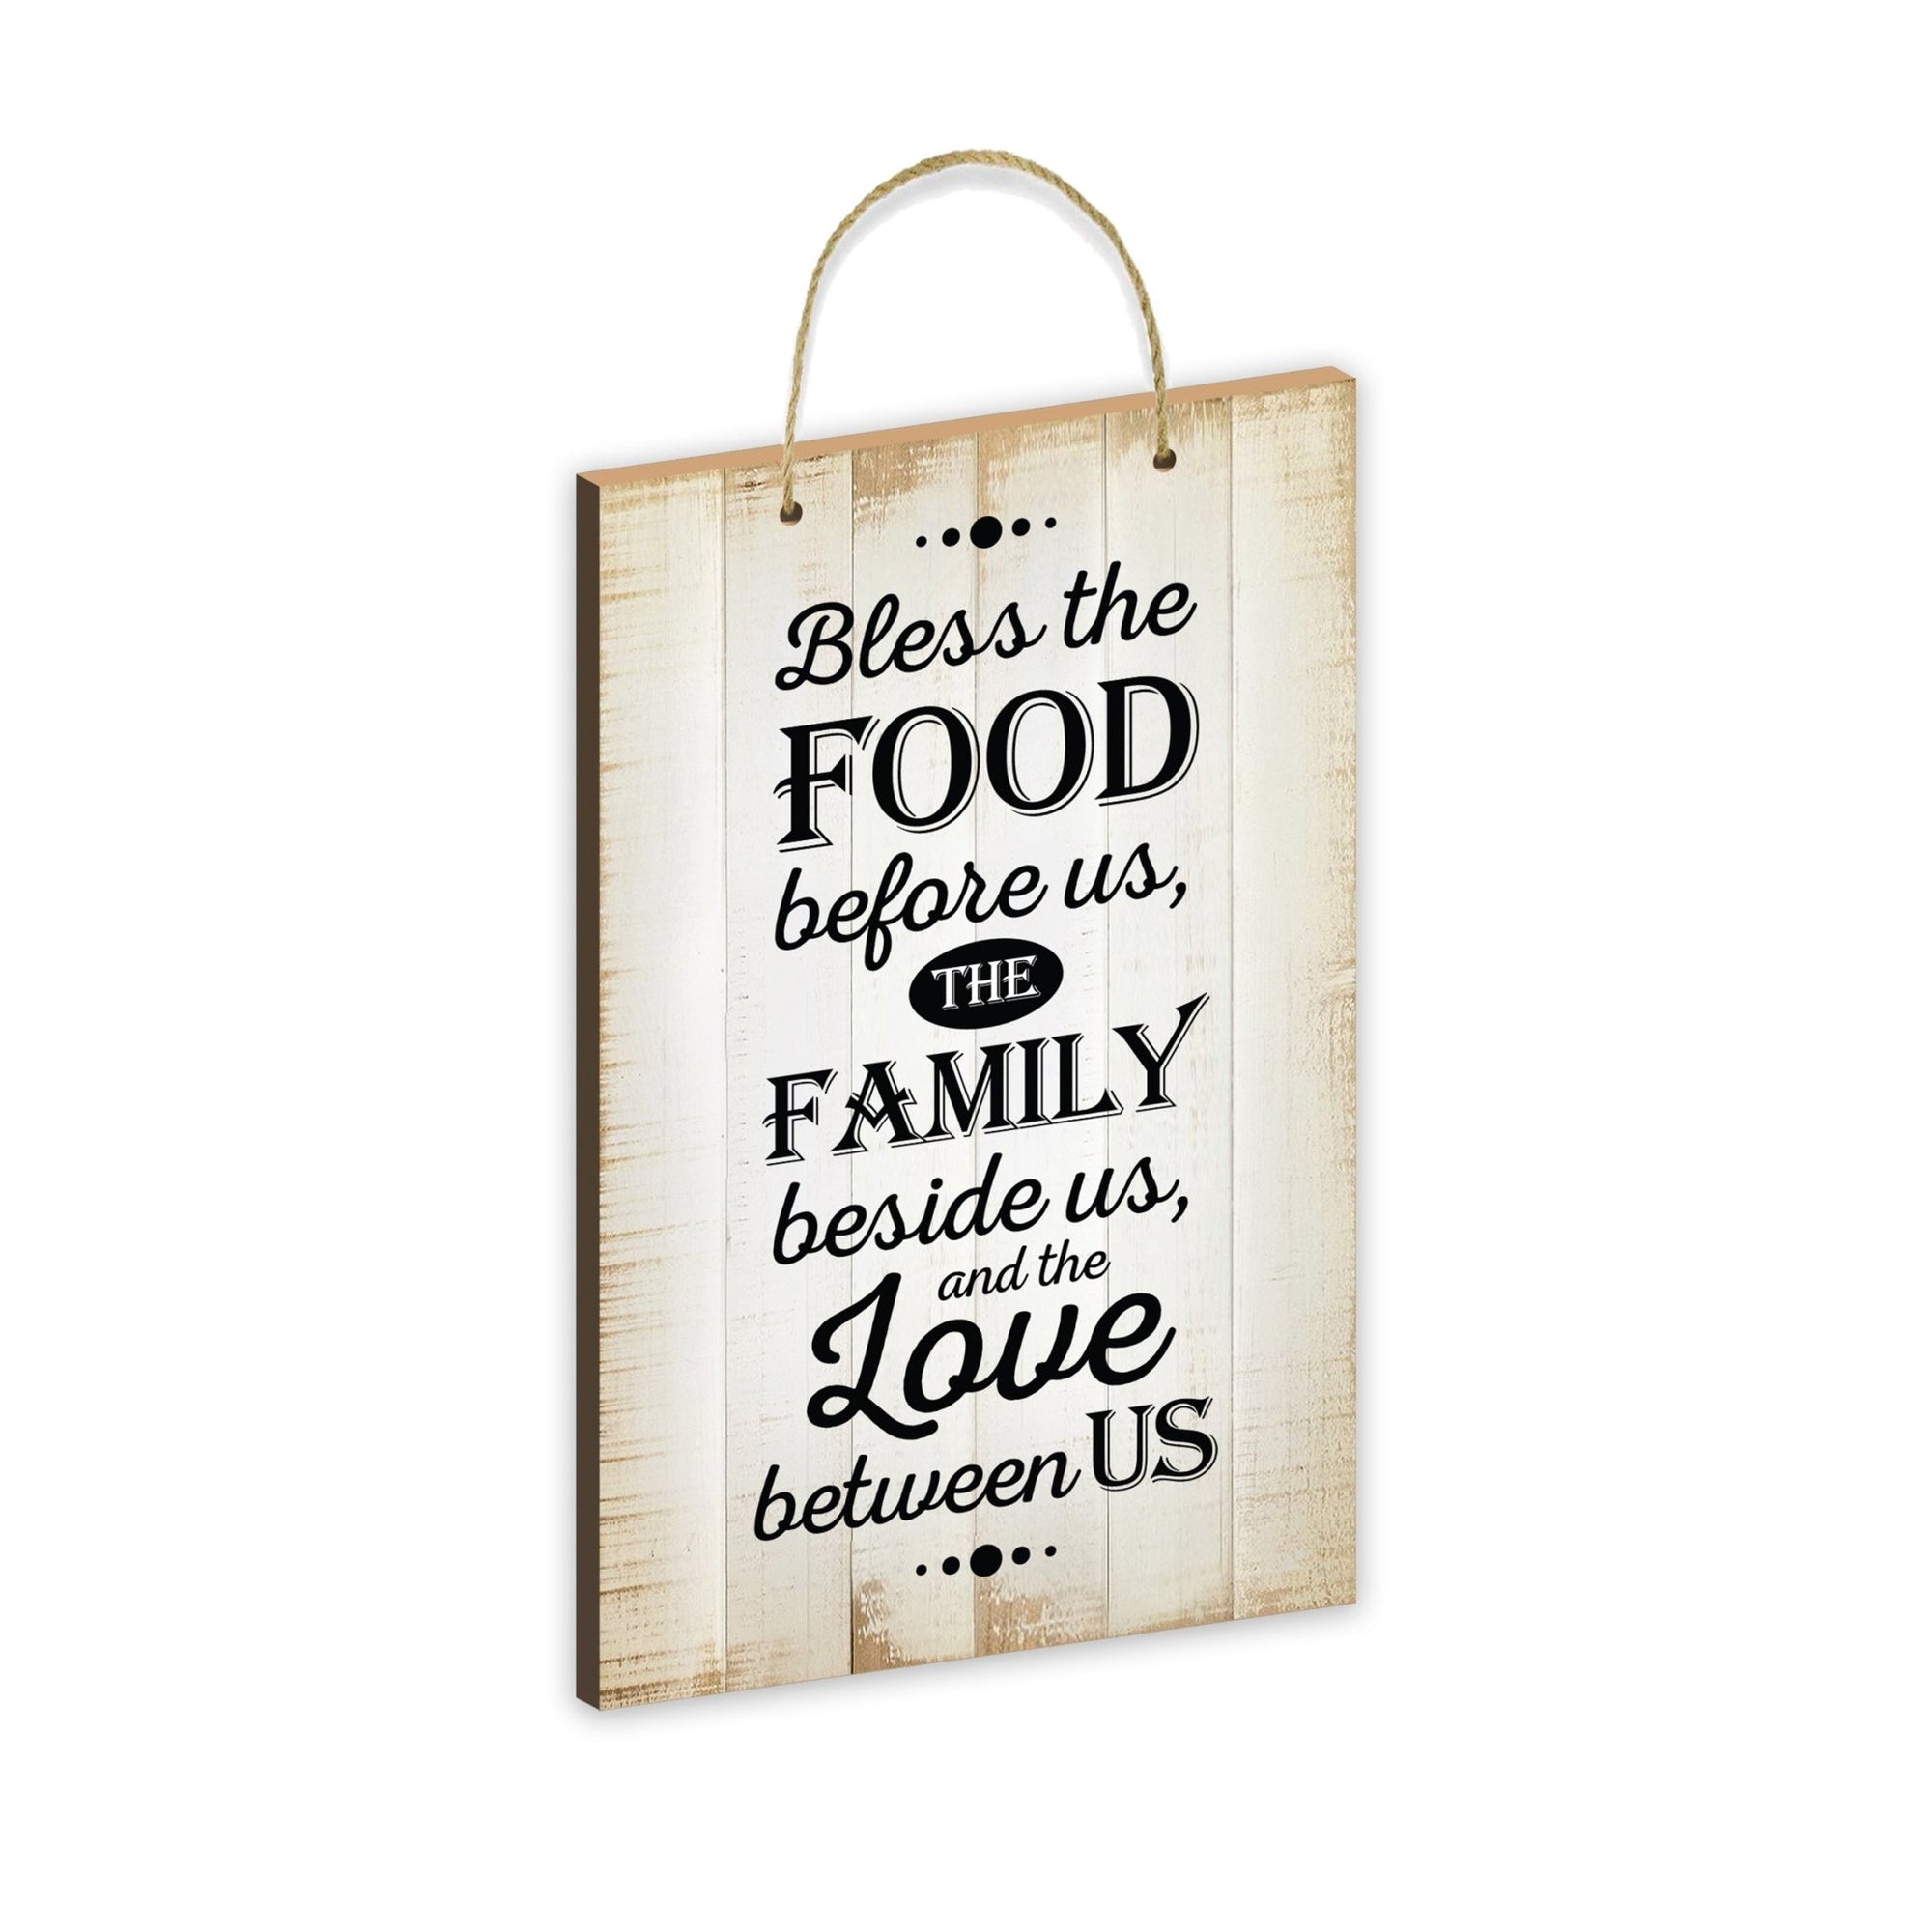 Inspirational Rustic Wooden Wall Hanging Rope Sign Kitchen Décor - Bless The Food